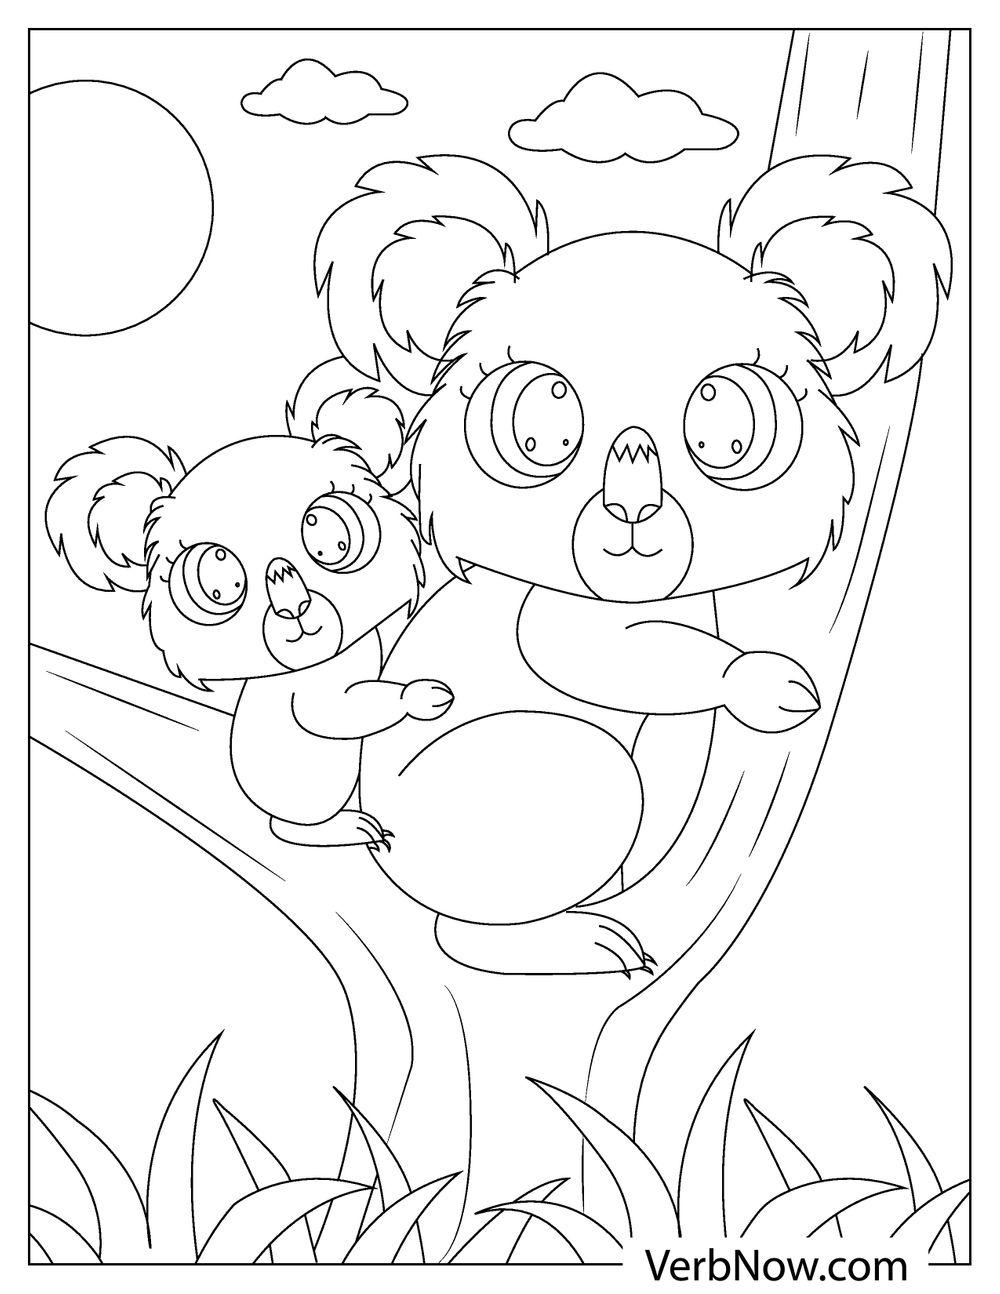 Free KOALA Coloring Pages & Book for Download (Printable PDF) - VerbNow